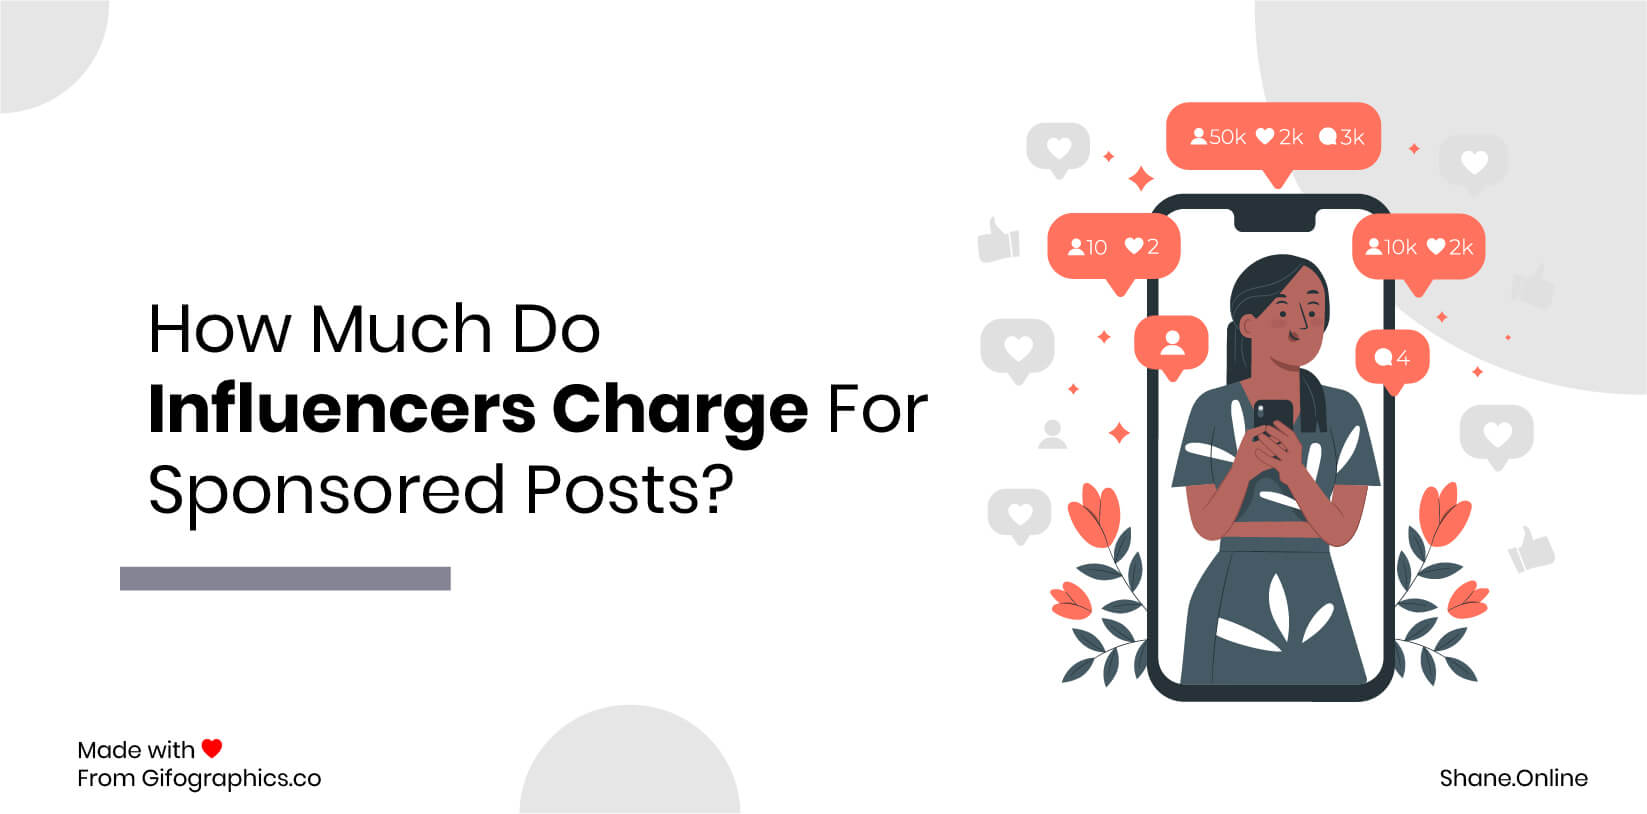 How Much Do Influencers Charge For Sponsored Posts